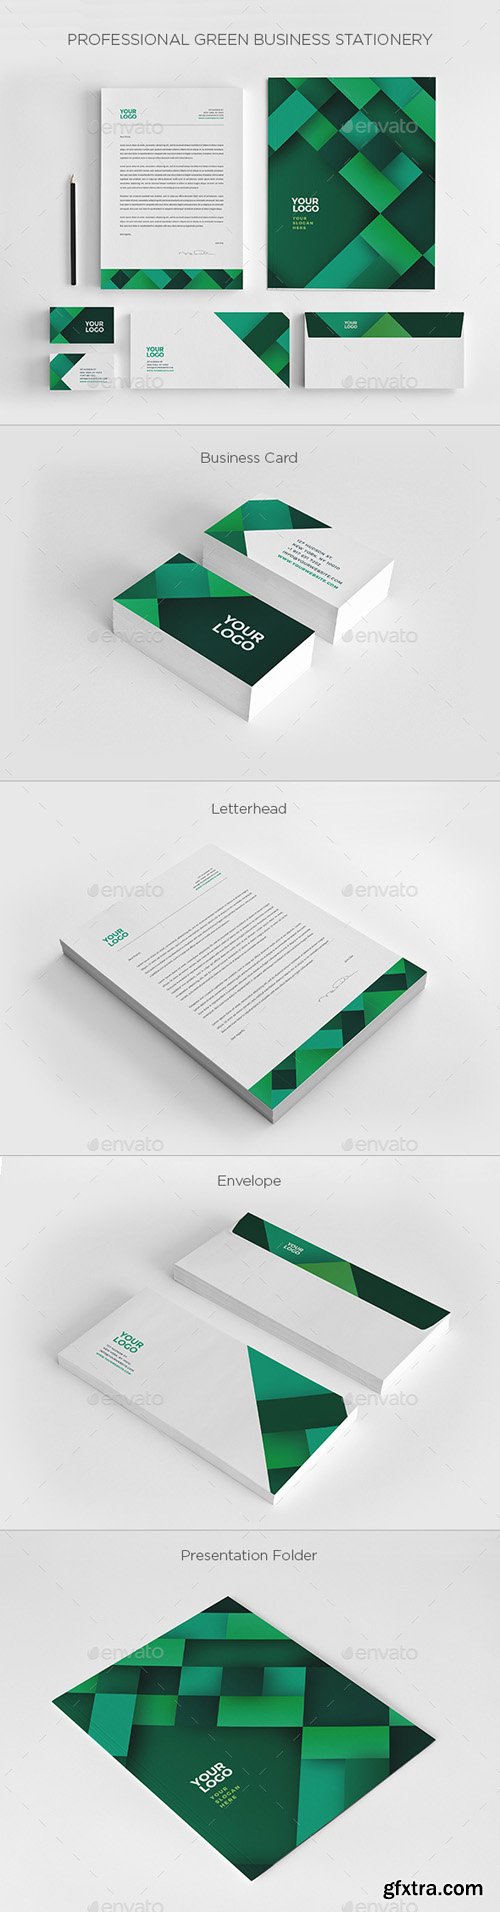 GR - Professional Green Business Stationery 19751586